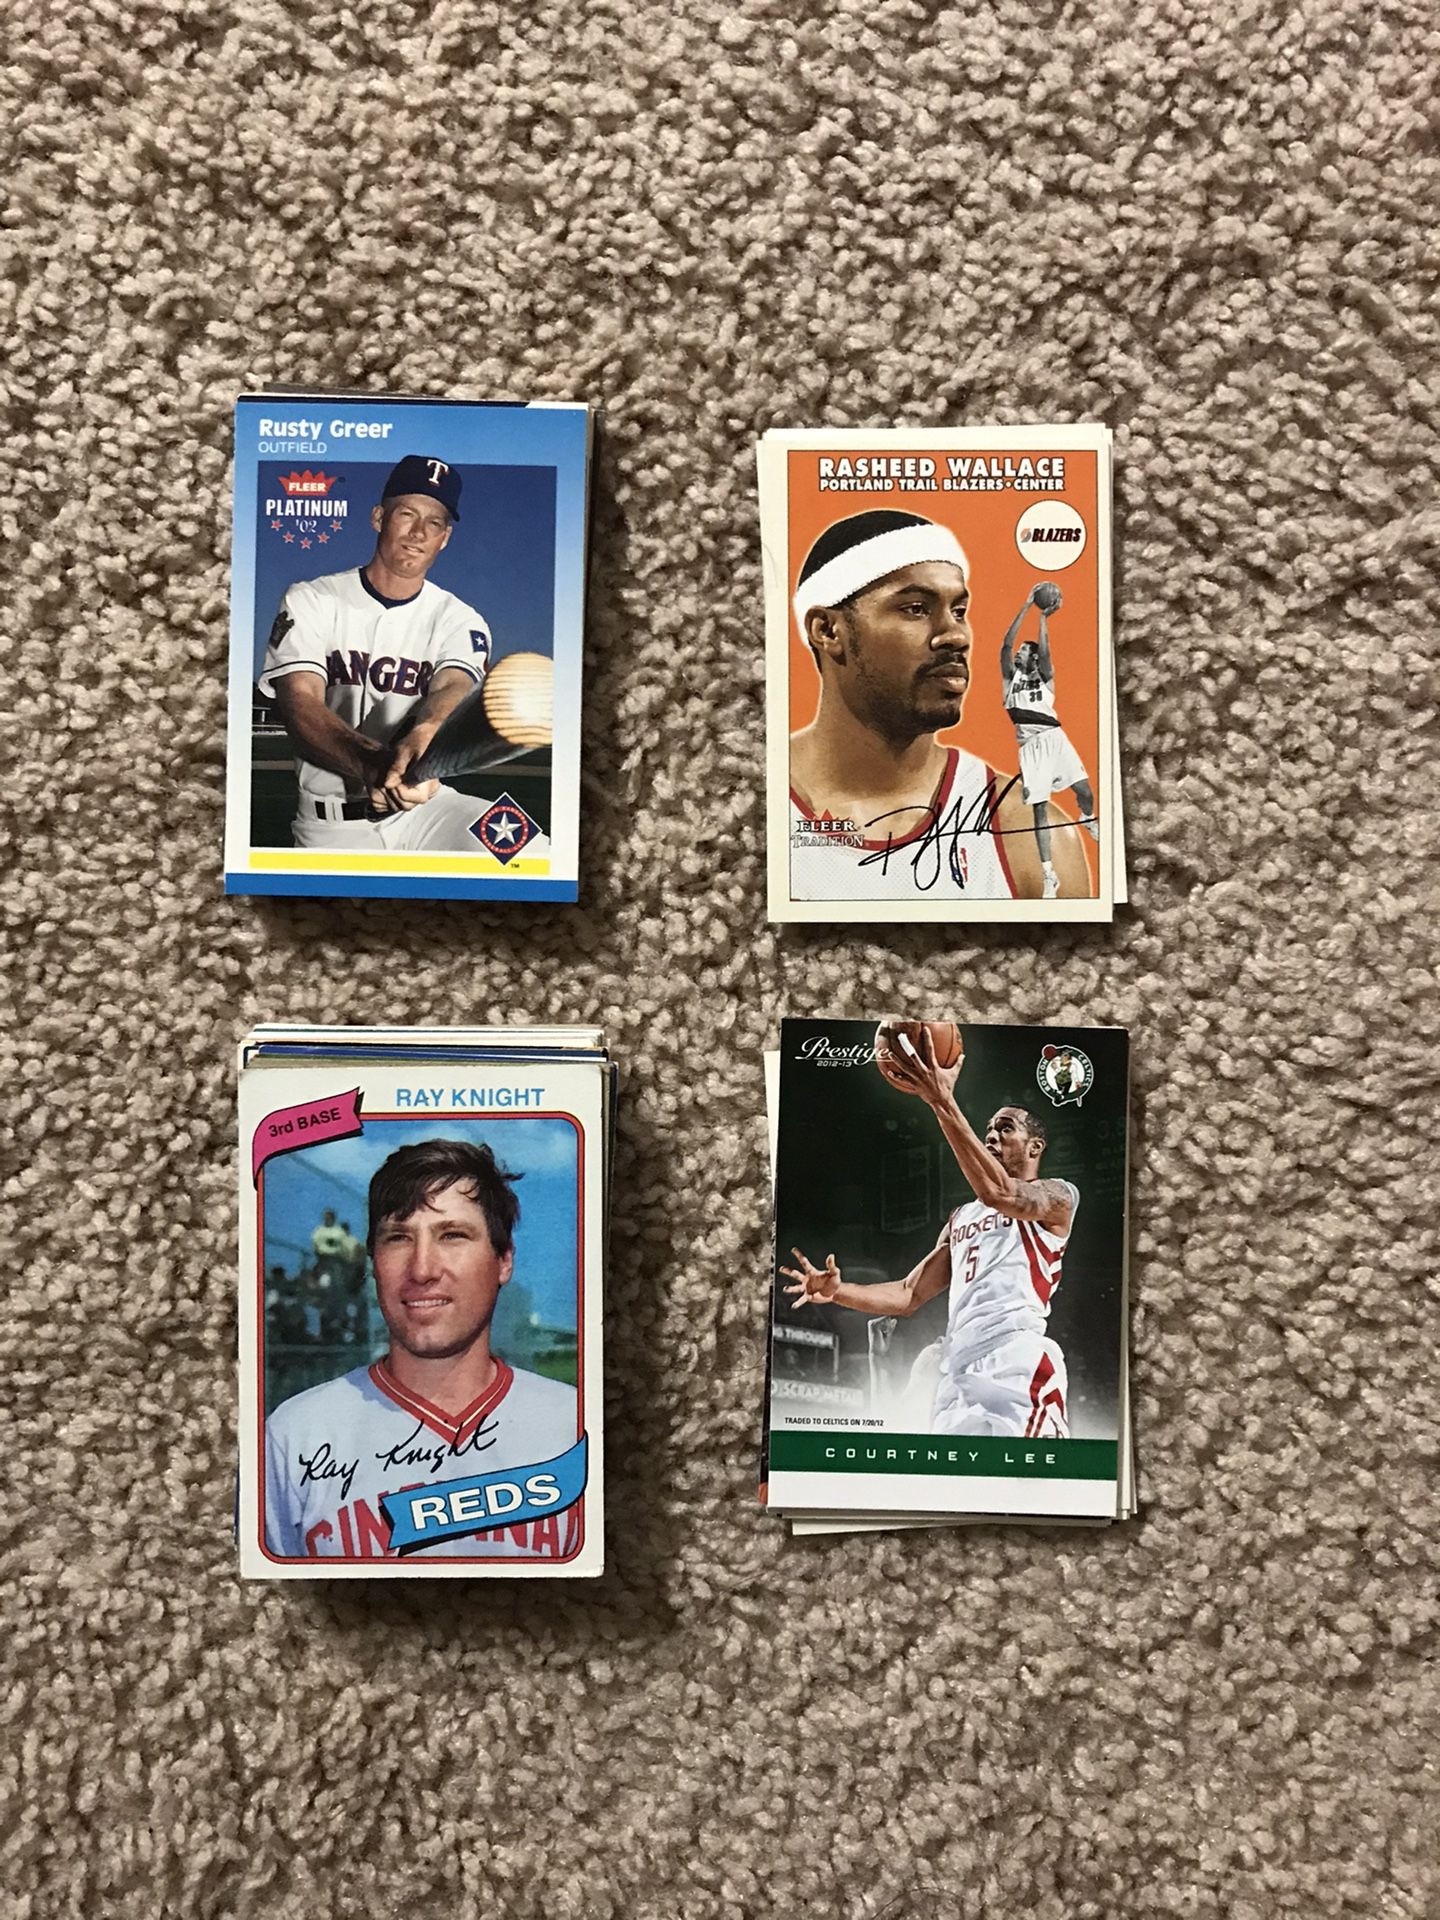 Lot of baseball, basketball, and other sports cards